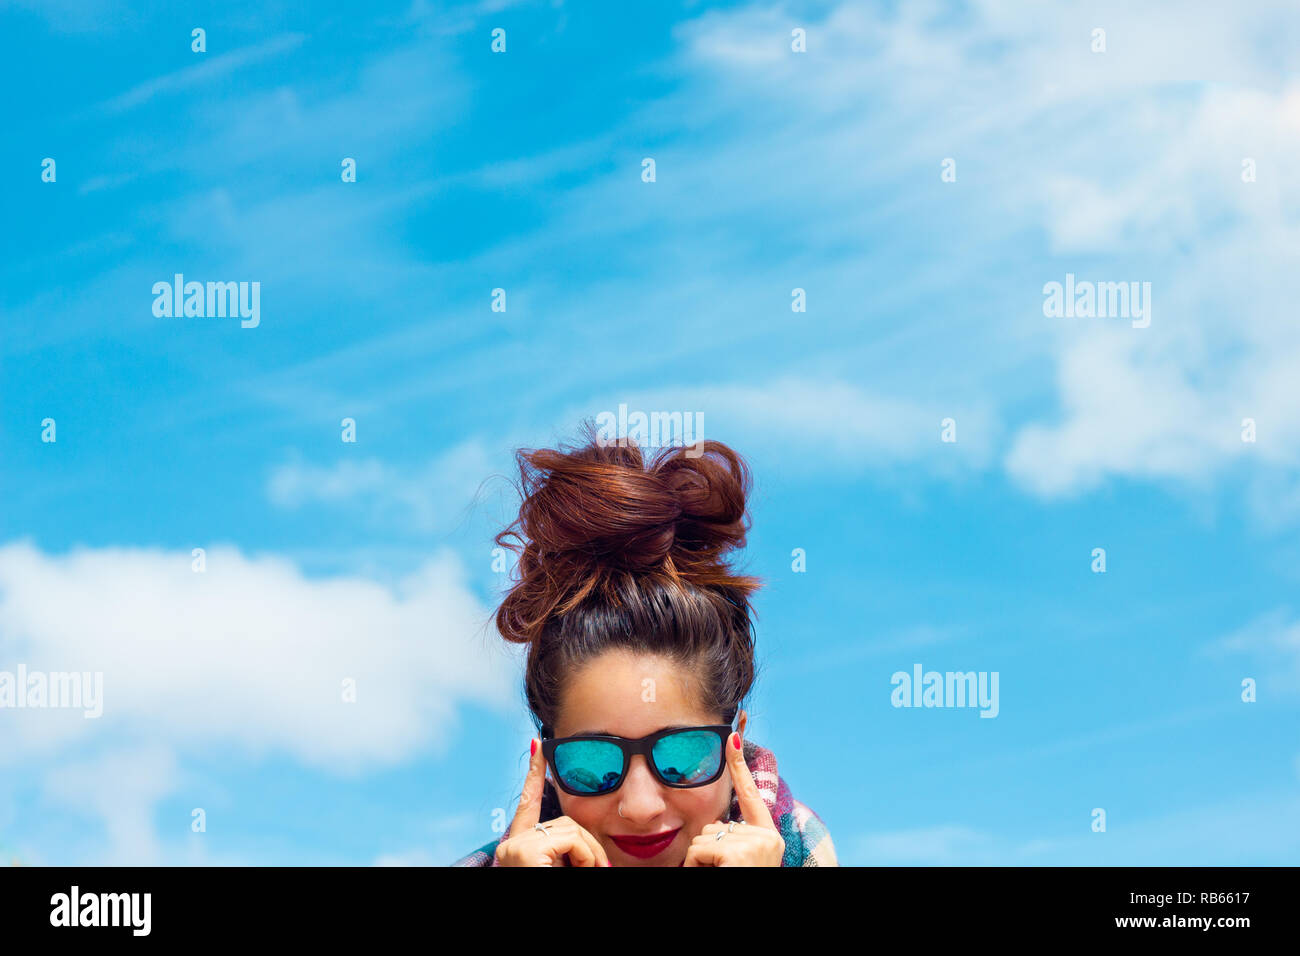 brunette girl with blue glasses and a big messy bun, red lips and nails with the sky as background Stock Photo